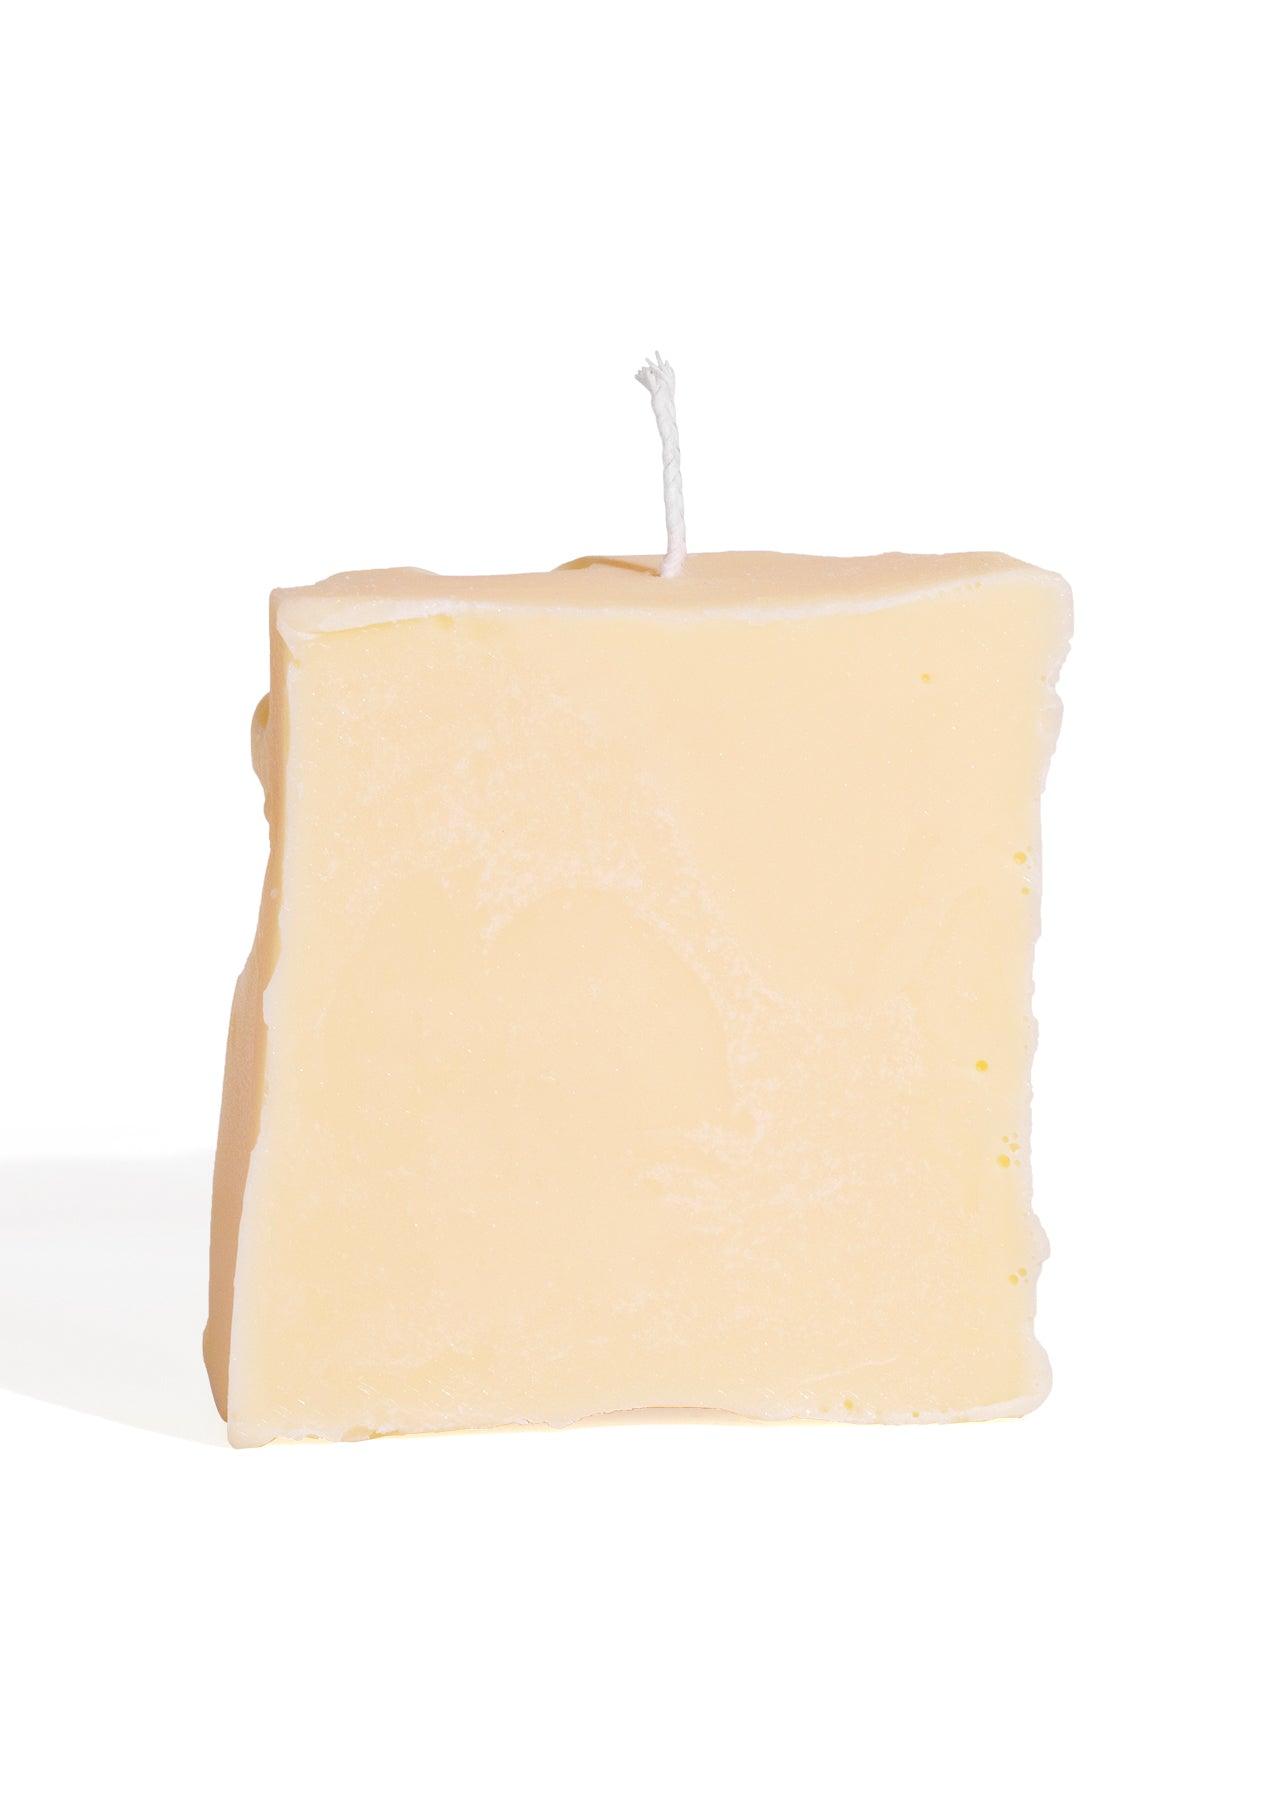 The Gruyère Cheese Candle